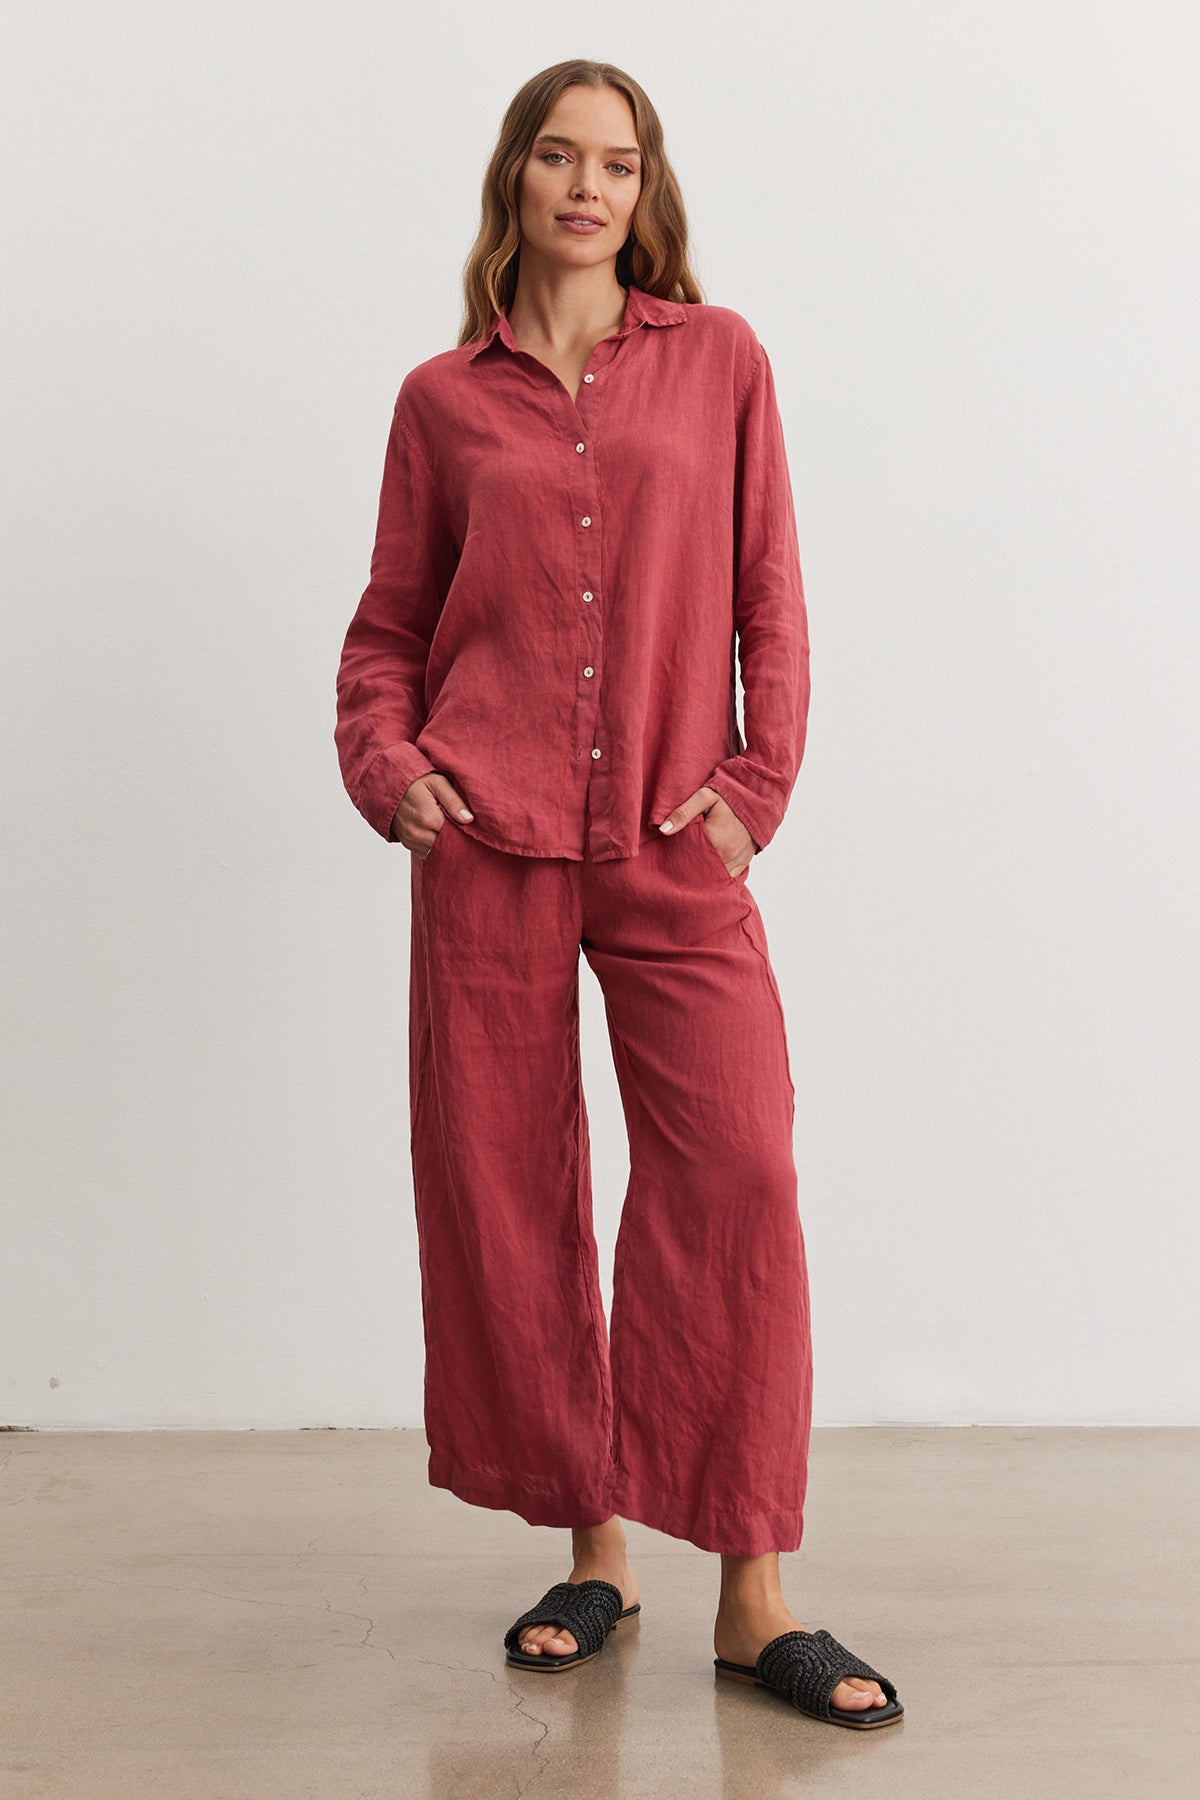 Woman standing in a studio, wearing a red woven linen Velvet by Graham & Spencer Willow Linen Button-Up Shirt and matching pants, paired with black sandals, looking at the camera with a relaxed expression.-36909599883457